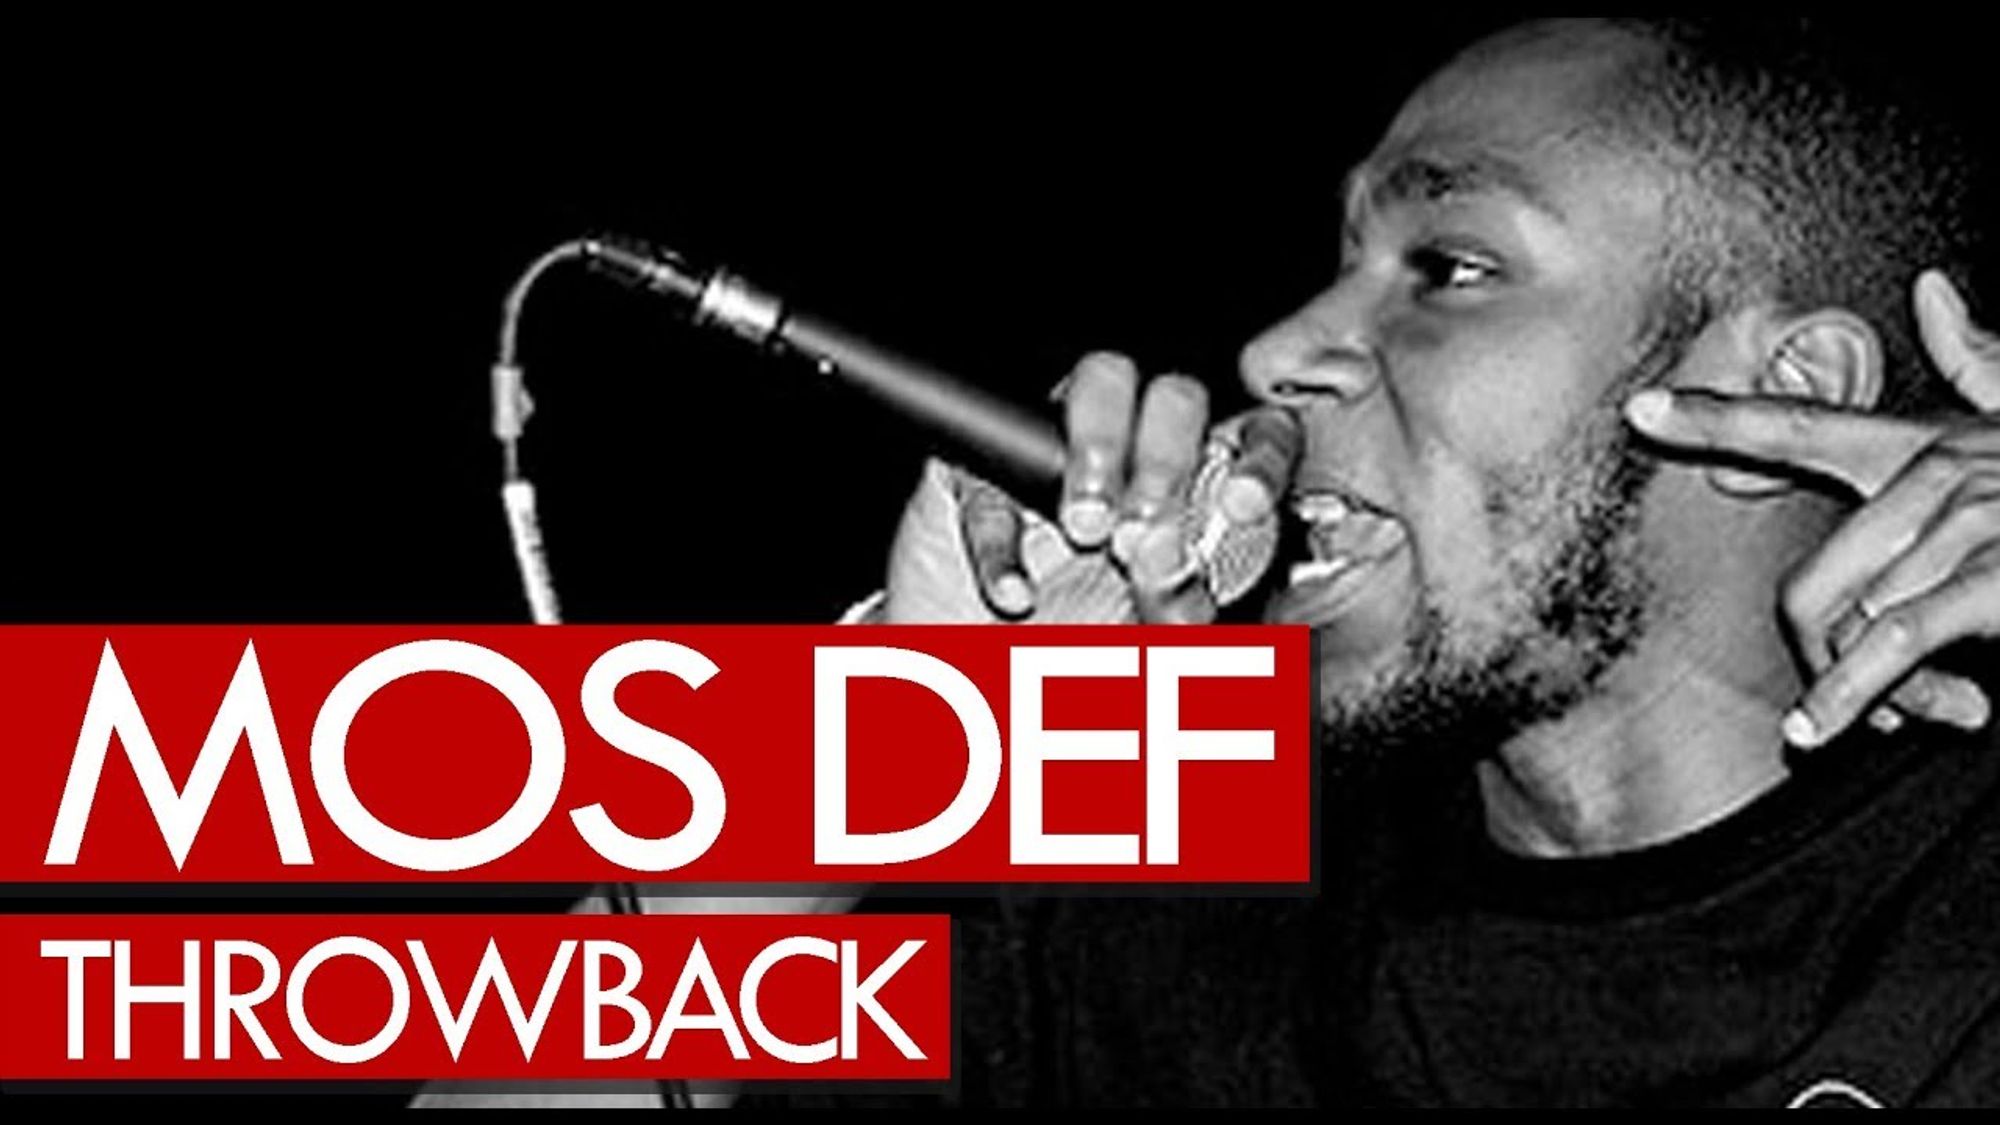 Mos-def, Albums, Songs, News, and Videos